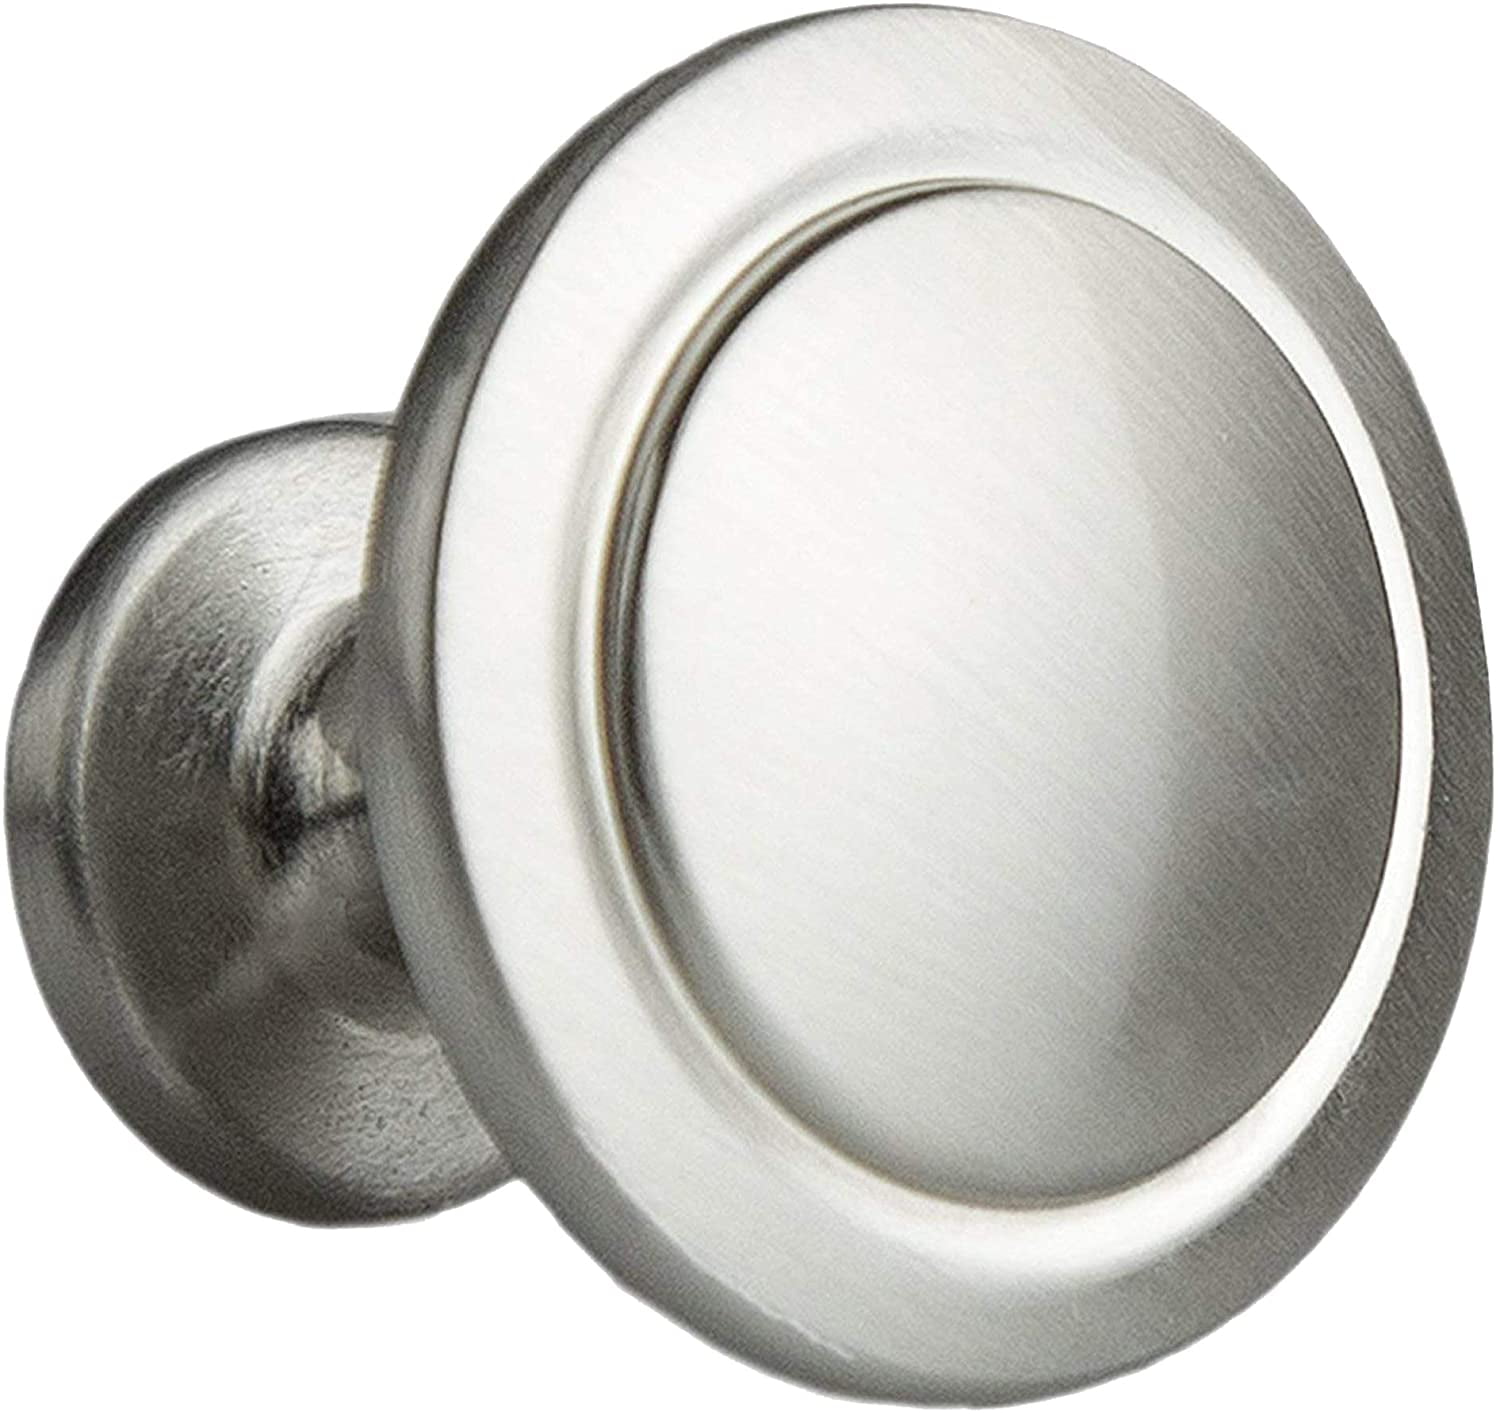 10 Pack Brushed Satin Nickel Cabinet Knobs - Round Drawer Pulls for Kitchen Cabinets - Refresh ...